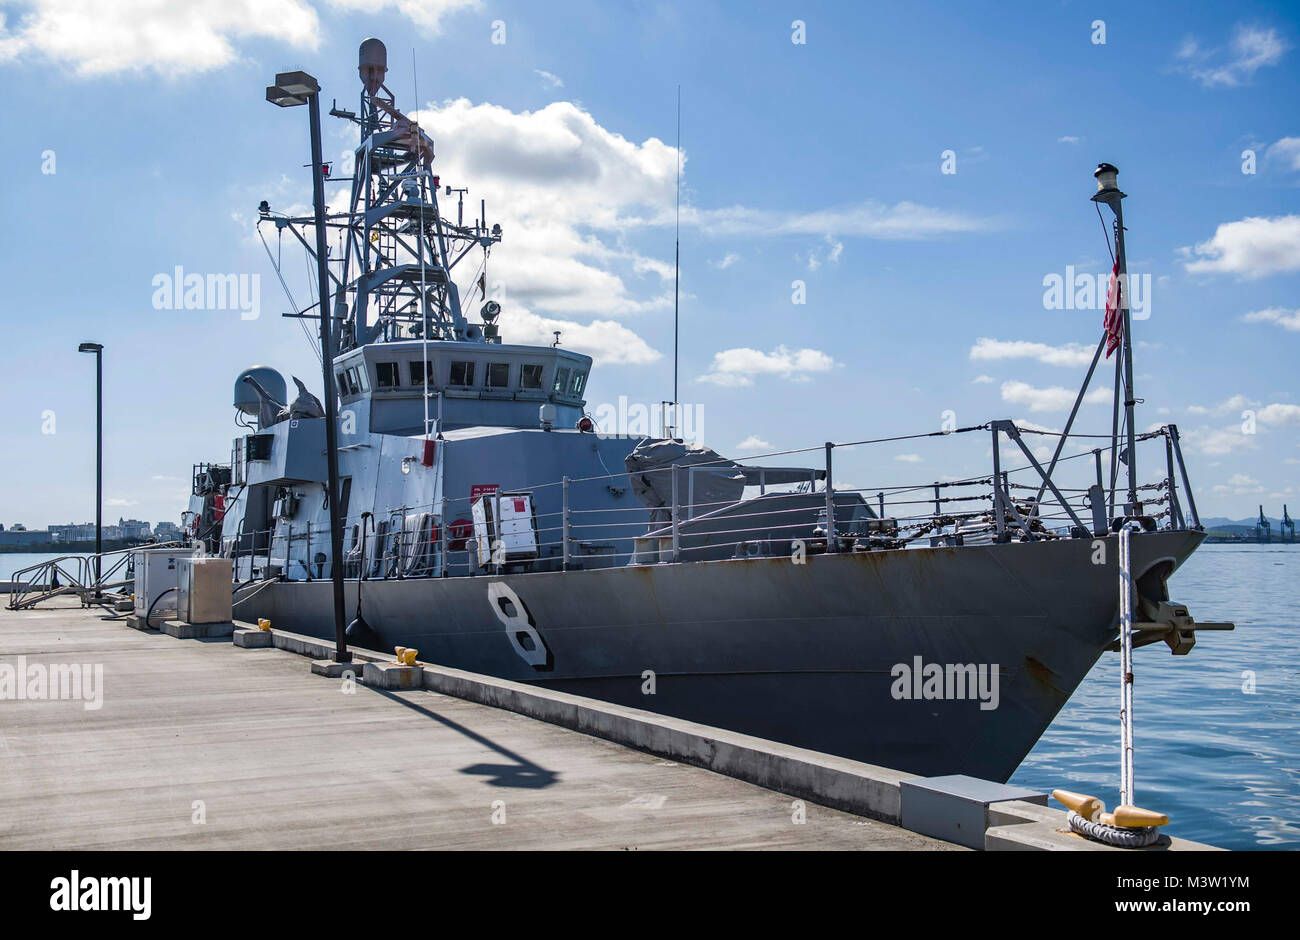 170414-N-EO381-002  SAN JUAN, Puerto Rico (April 17, 2017) - The Cyclone-class patrol coastal ship USS Zephyr (PC 8) is docked at U.S. Coast Guard station San Juan. Zephyr is currently underway in support of Operation Martillo, a joint operation with the U.S. Coast Guard and partner nations, within the 4th Fleet area of responsibility. (U.S. Navy photo by Mass Commuication Specialist 3rd Class Casey J. Hopkins/Released) 170414-N-EO381-002 by ussouthcom Stock Photo